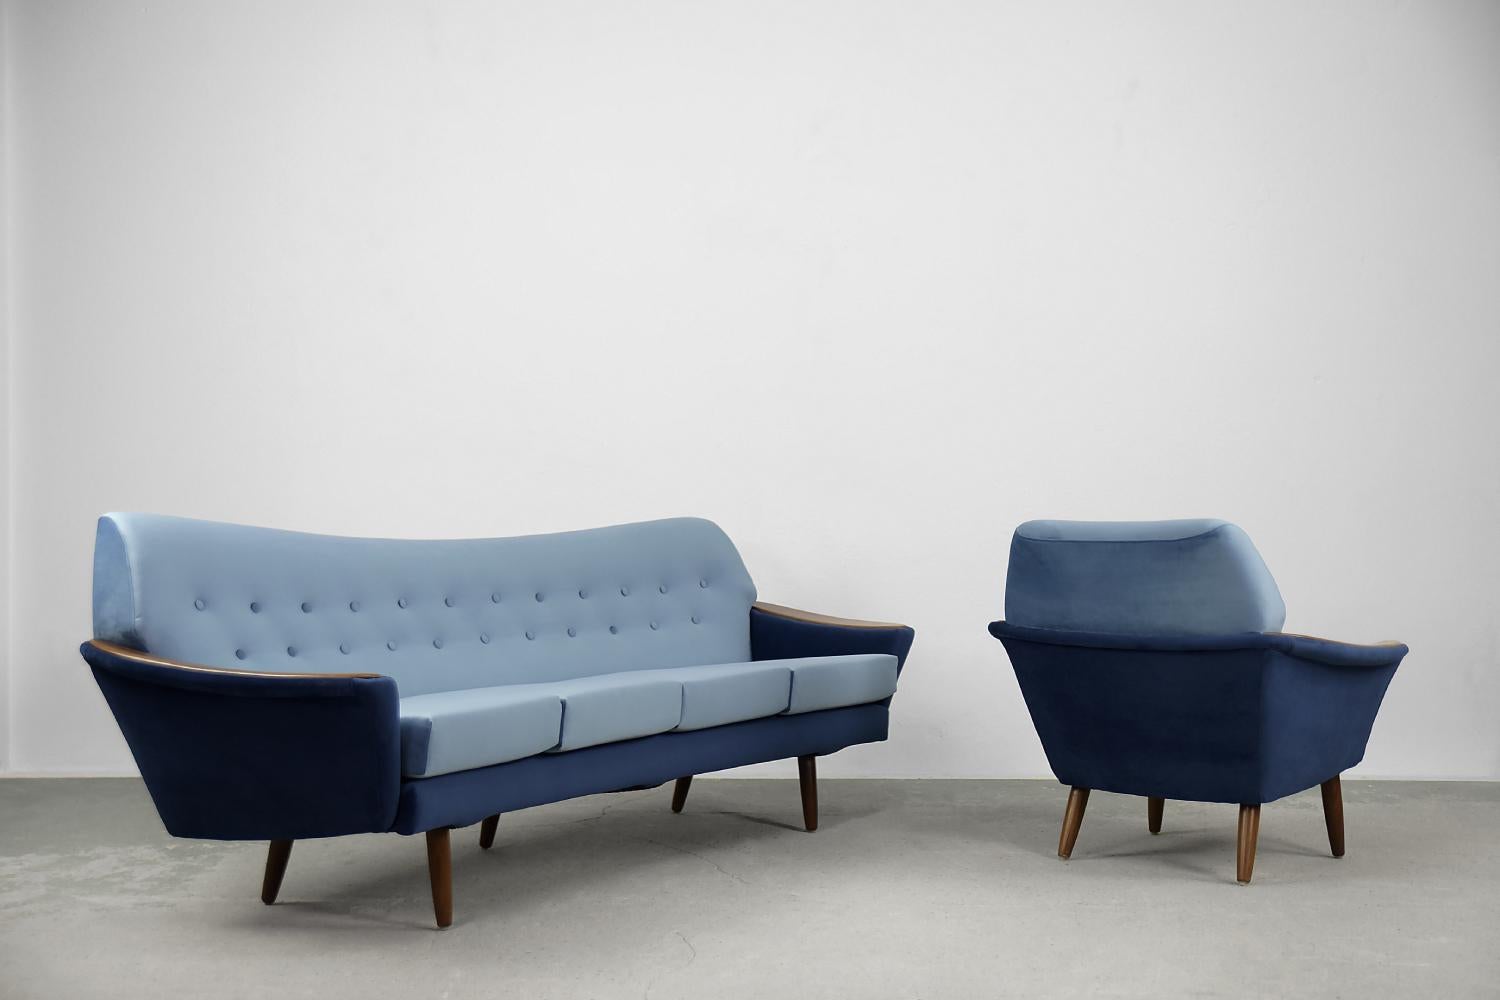 This rare modernist lounge set was manufactured by the Swedish manufacturer Holm Fabriker AB in the early 1960s. It consists of a four-seater sofa and an armchair. It was finished with the highest quality velor material in shades of royal blue. The